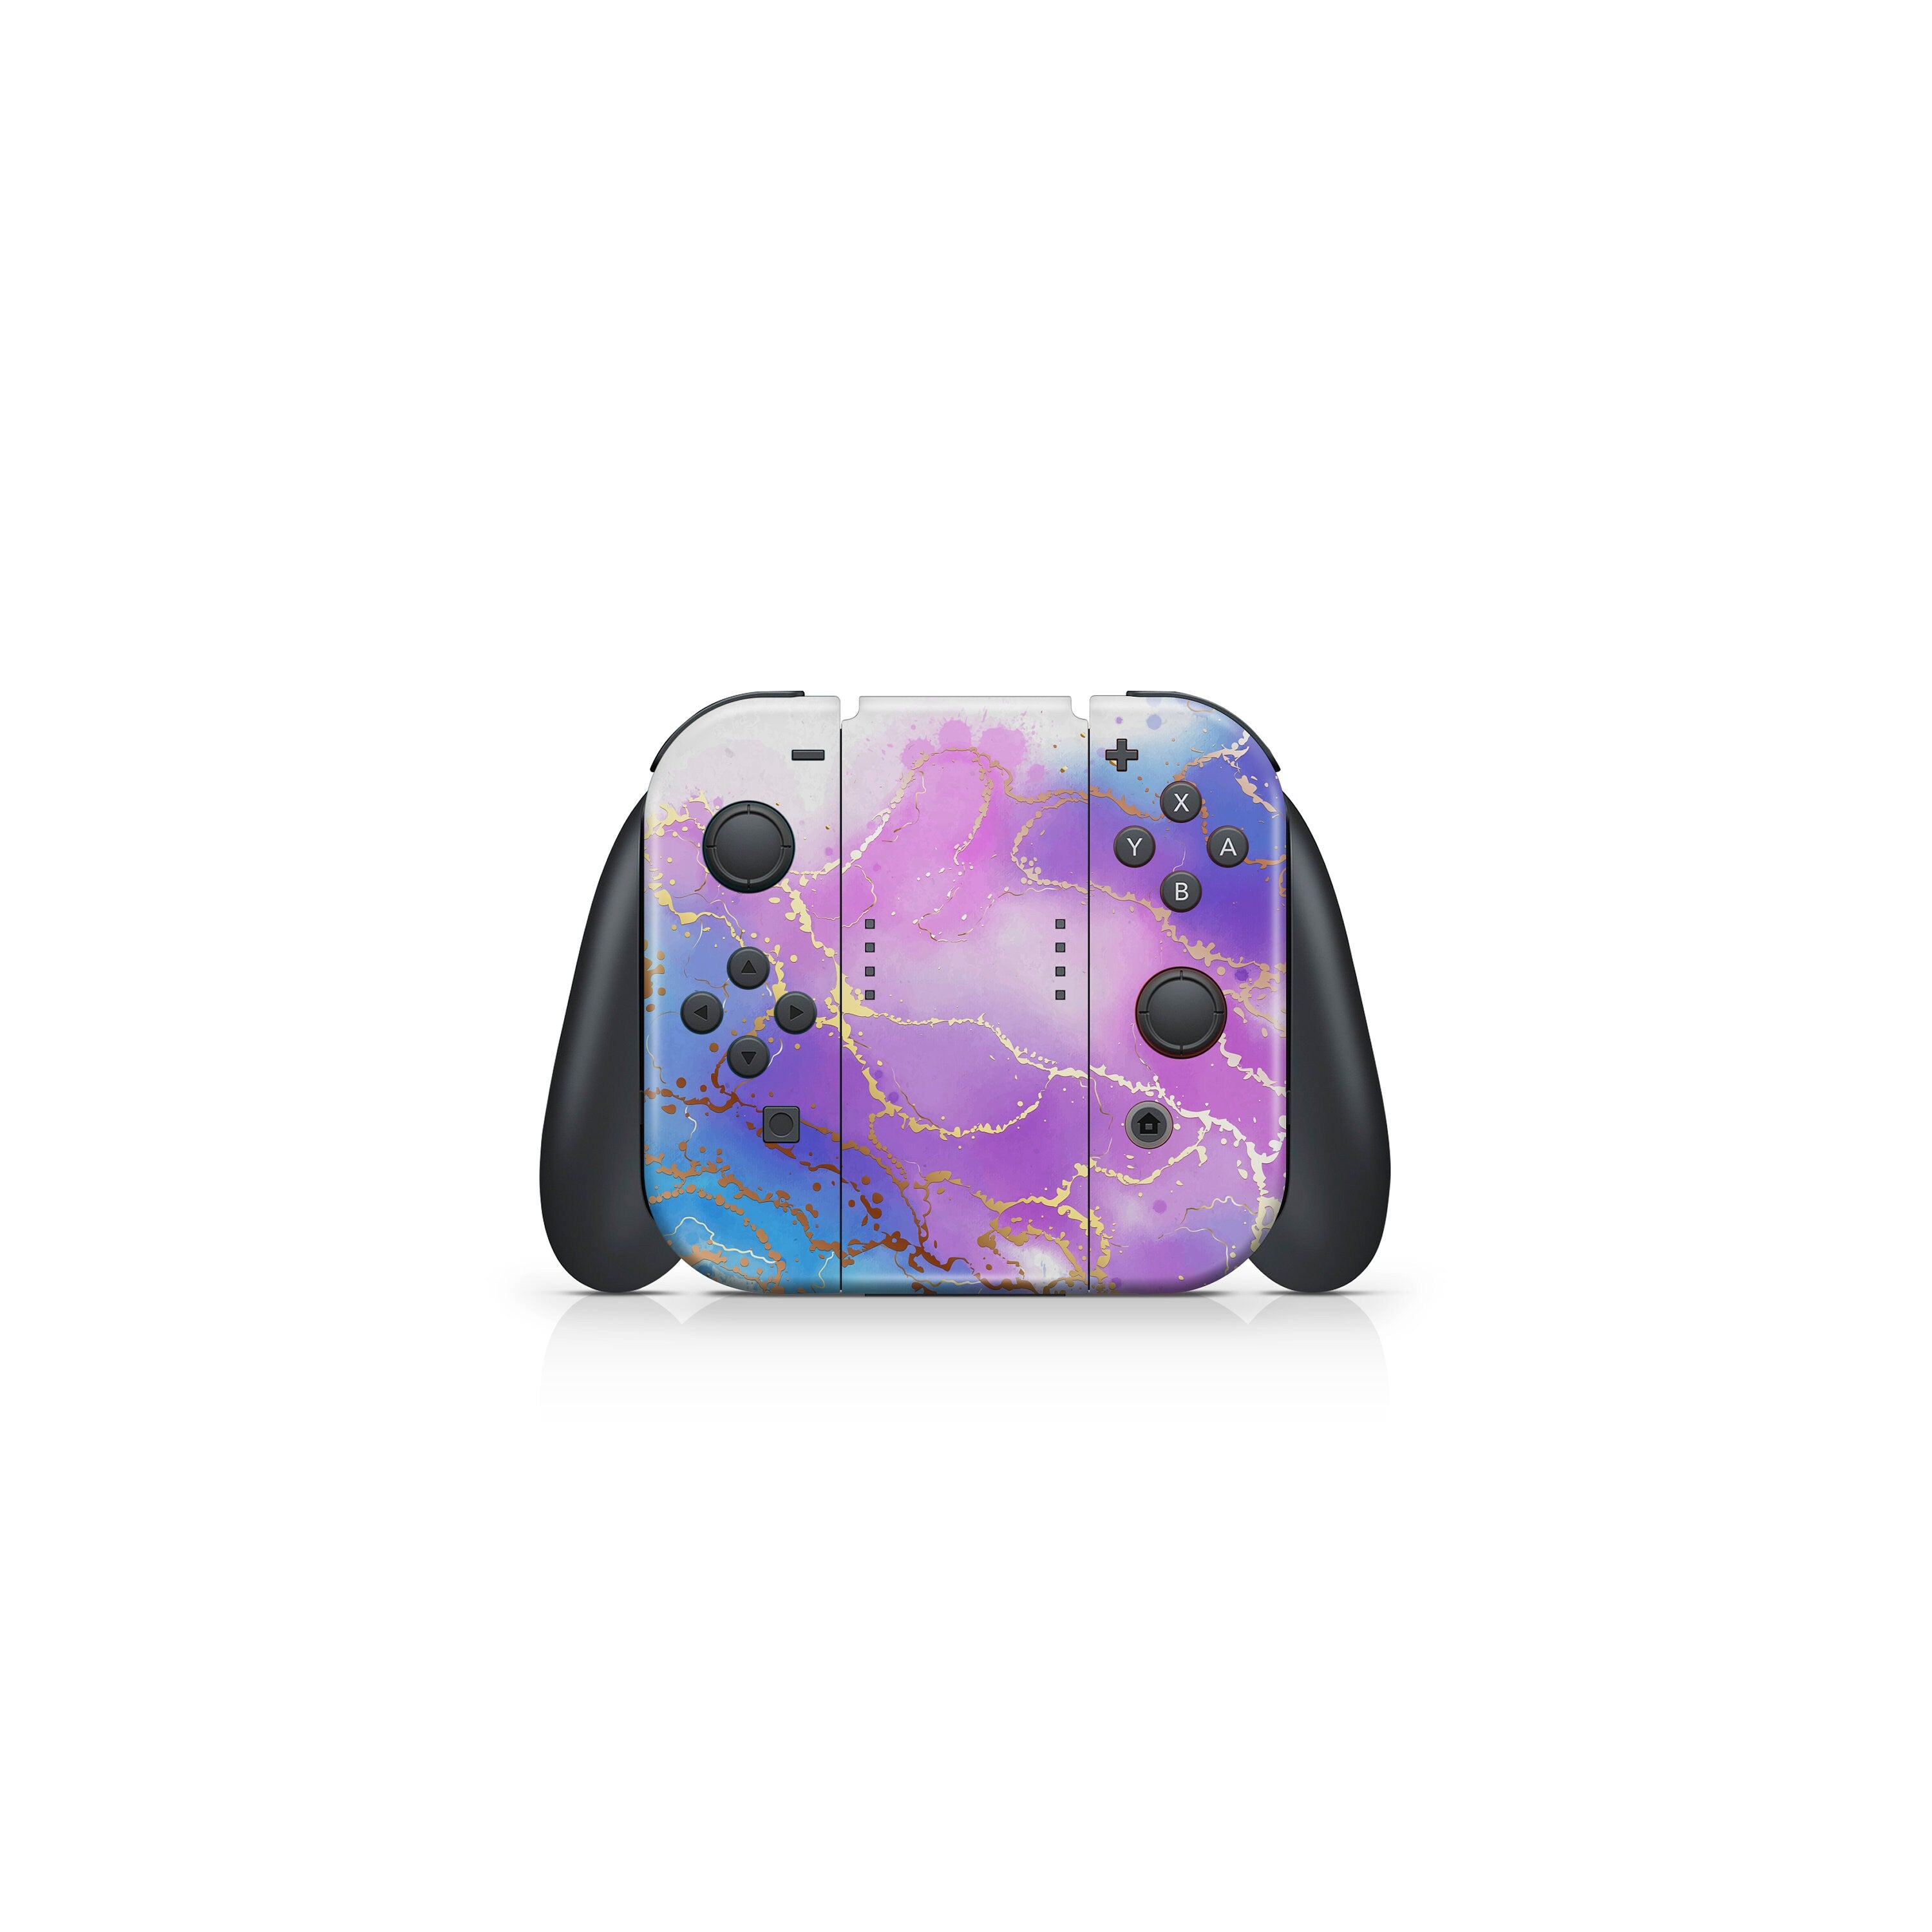 Nintendo Switches skin Marble Design Skin, Purple and Blue Color switch skin Cute Full cover 3m